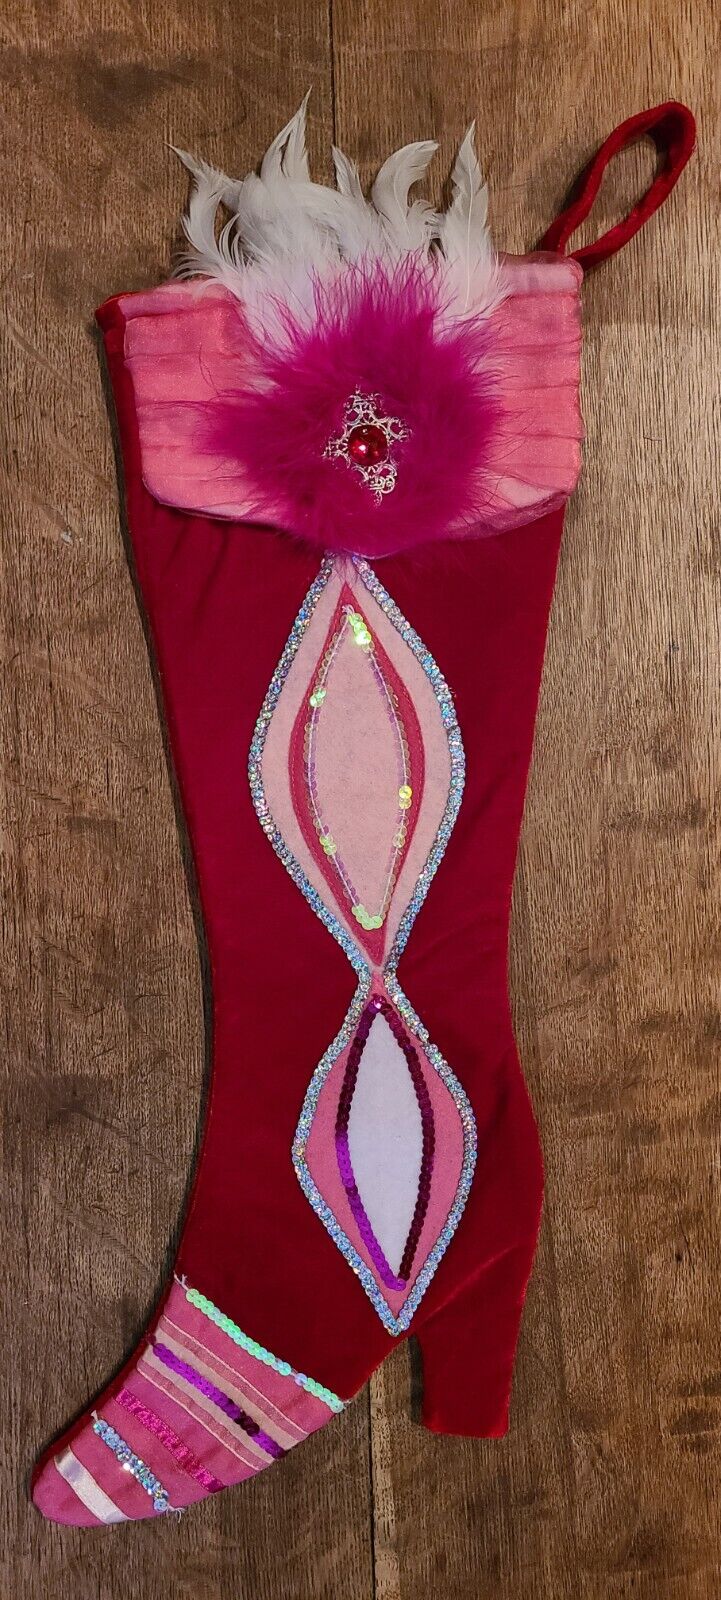 PIER 1 Imports Christmas Stocking Red Pink Victorian Boot Feathers Sequin Trim